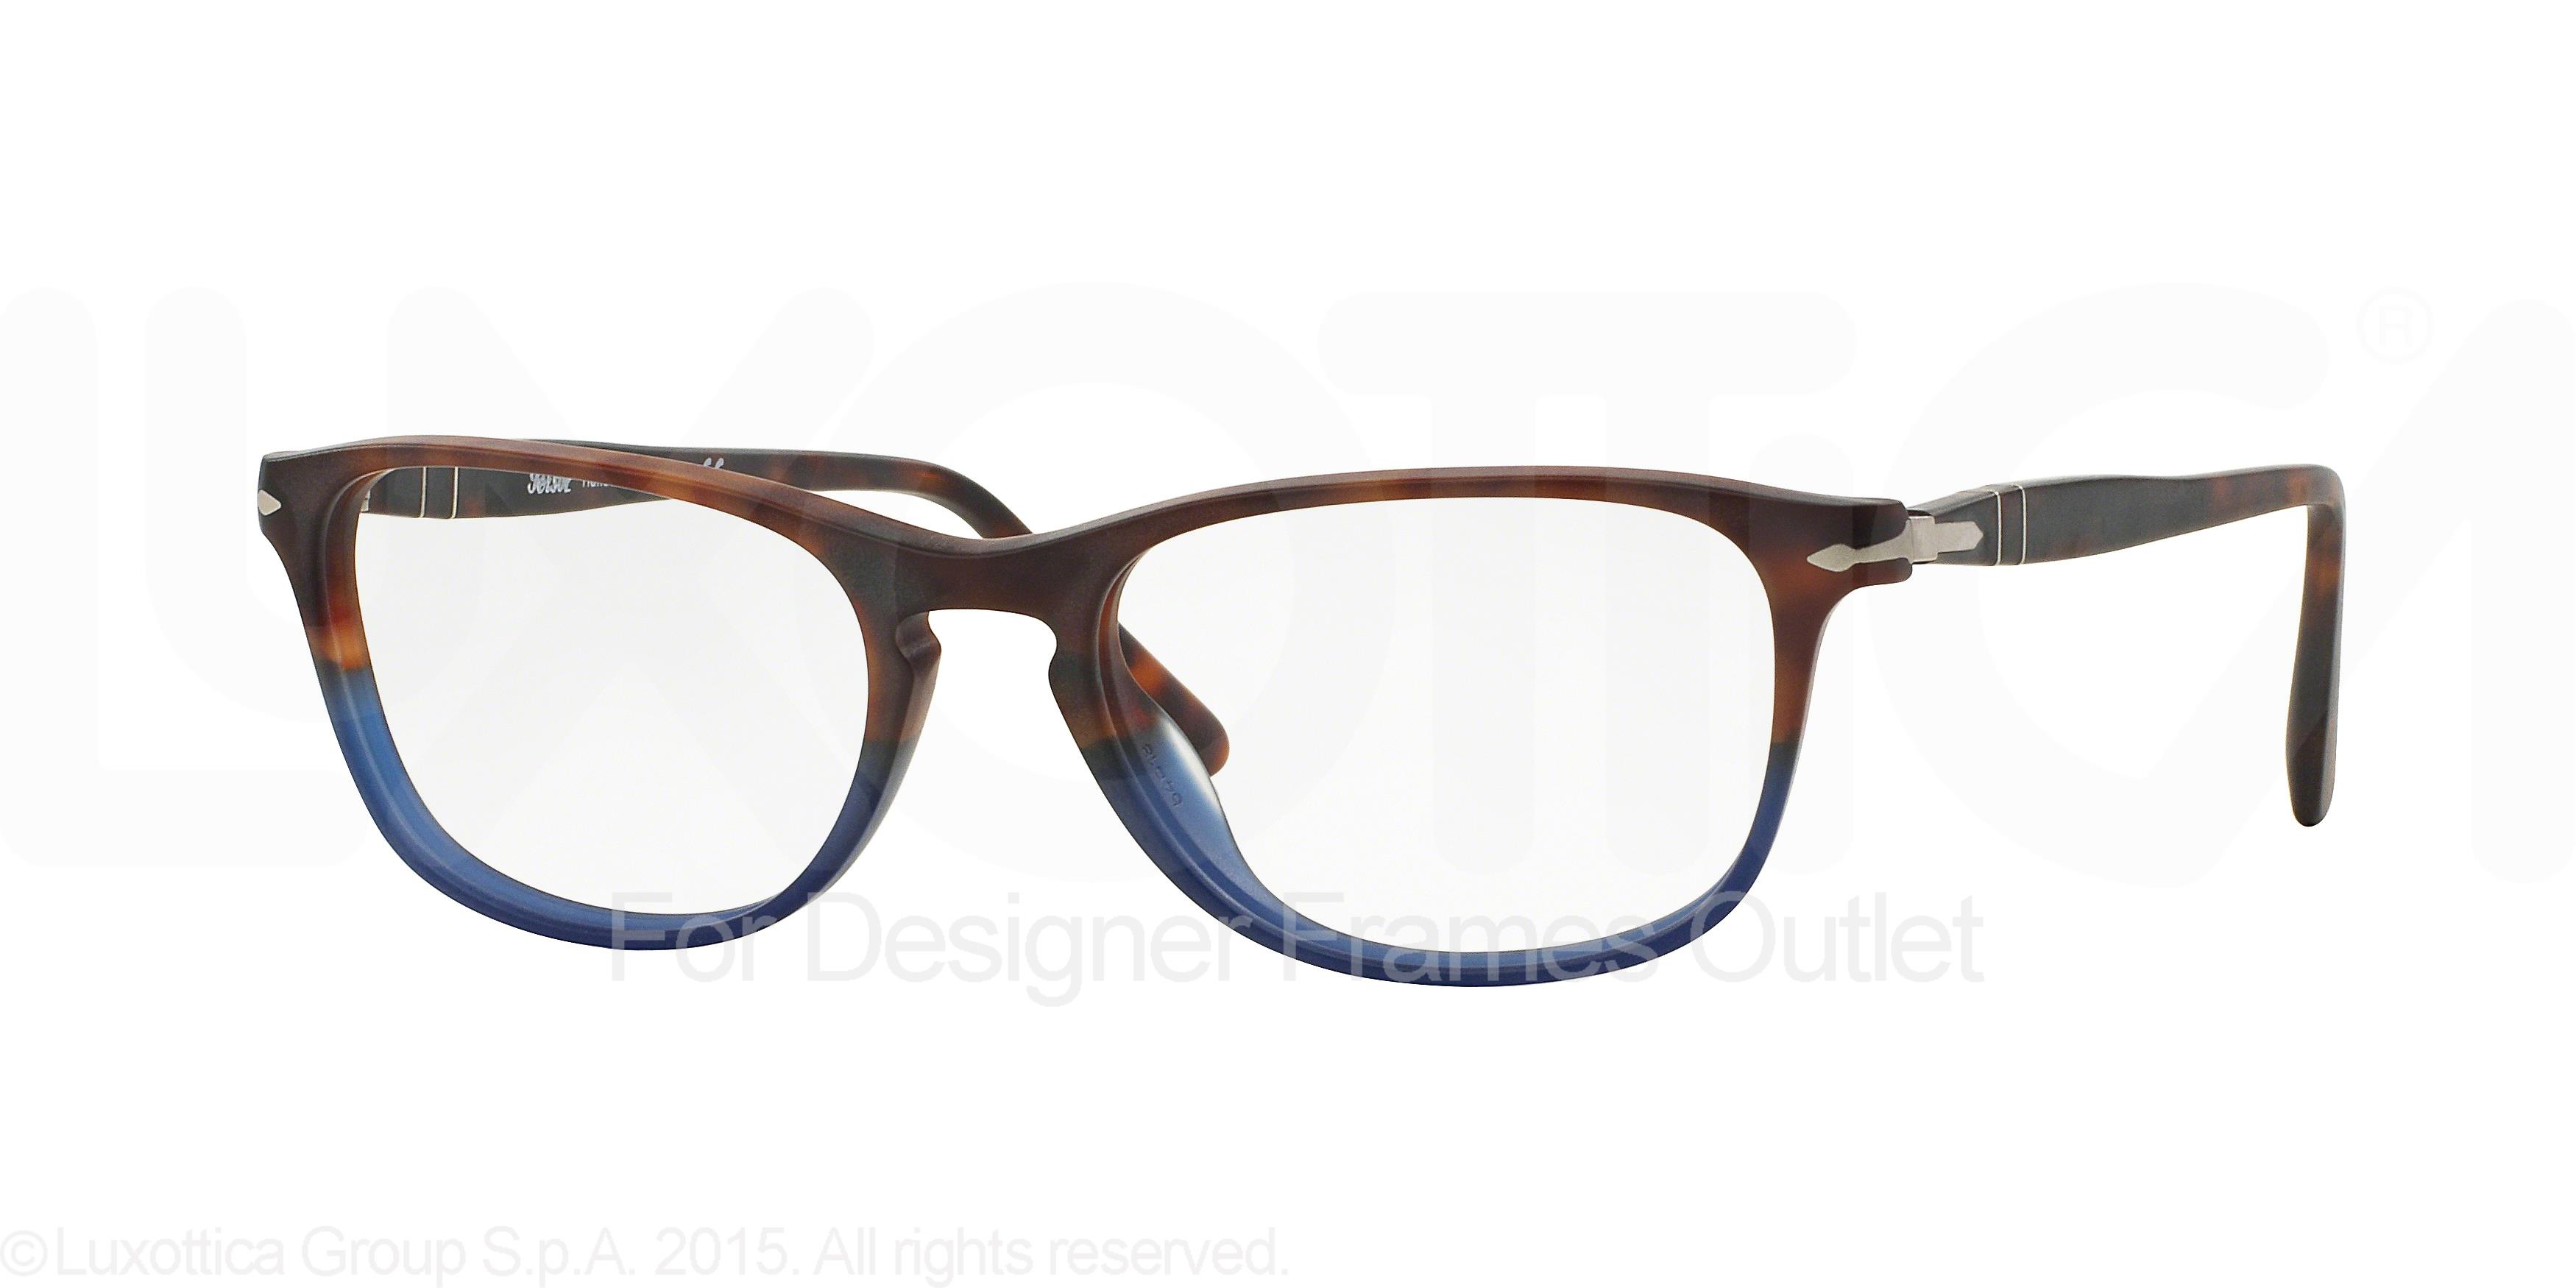 Picture of Persol Eyeglasses PO3116V